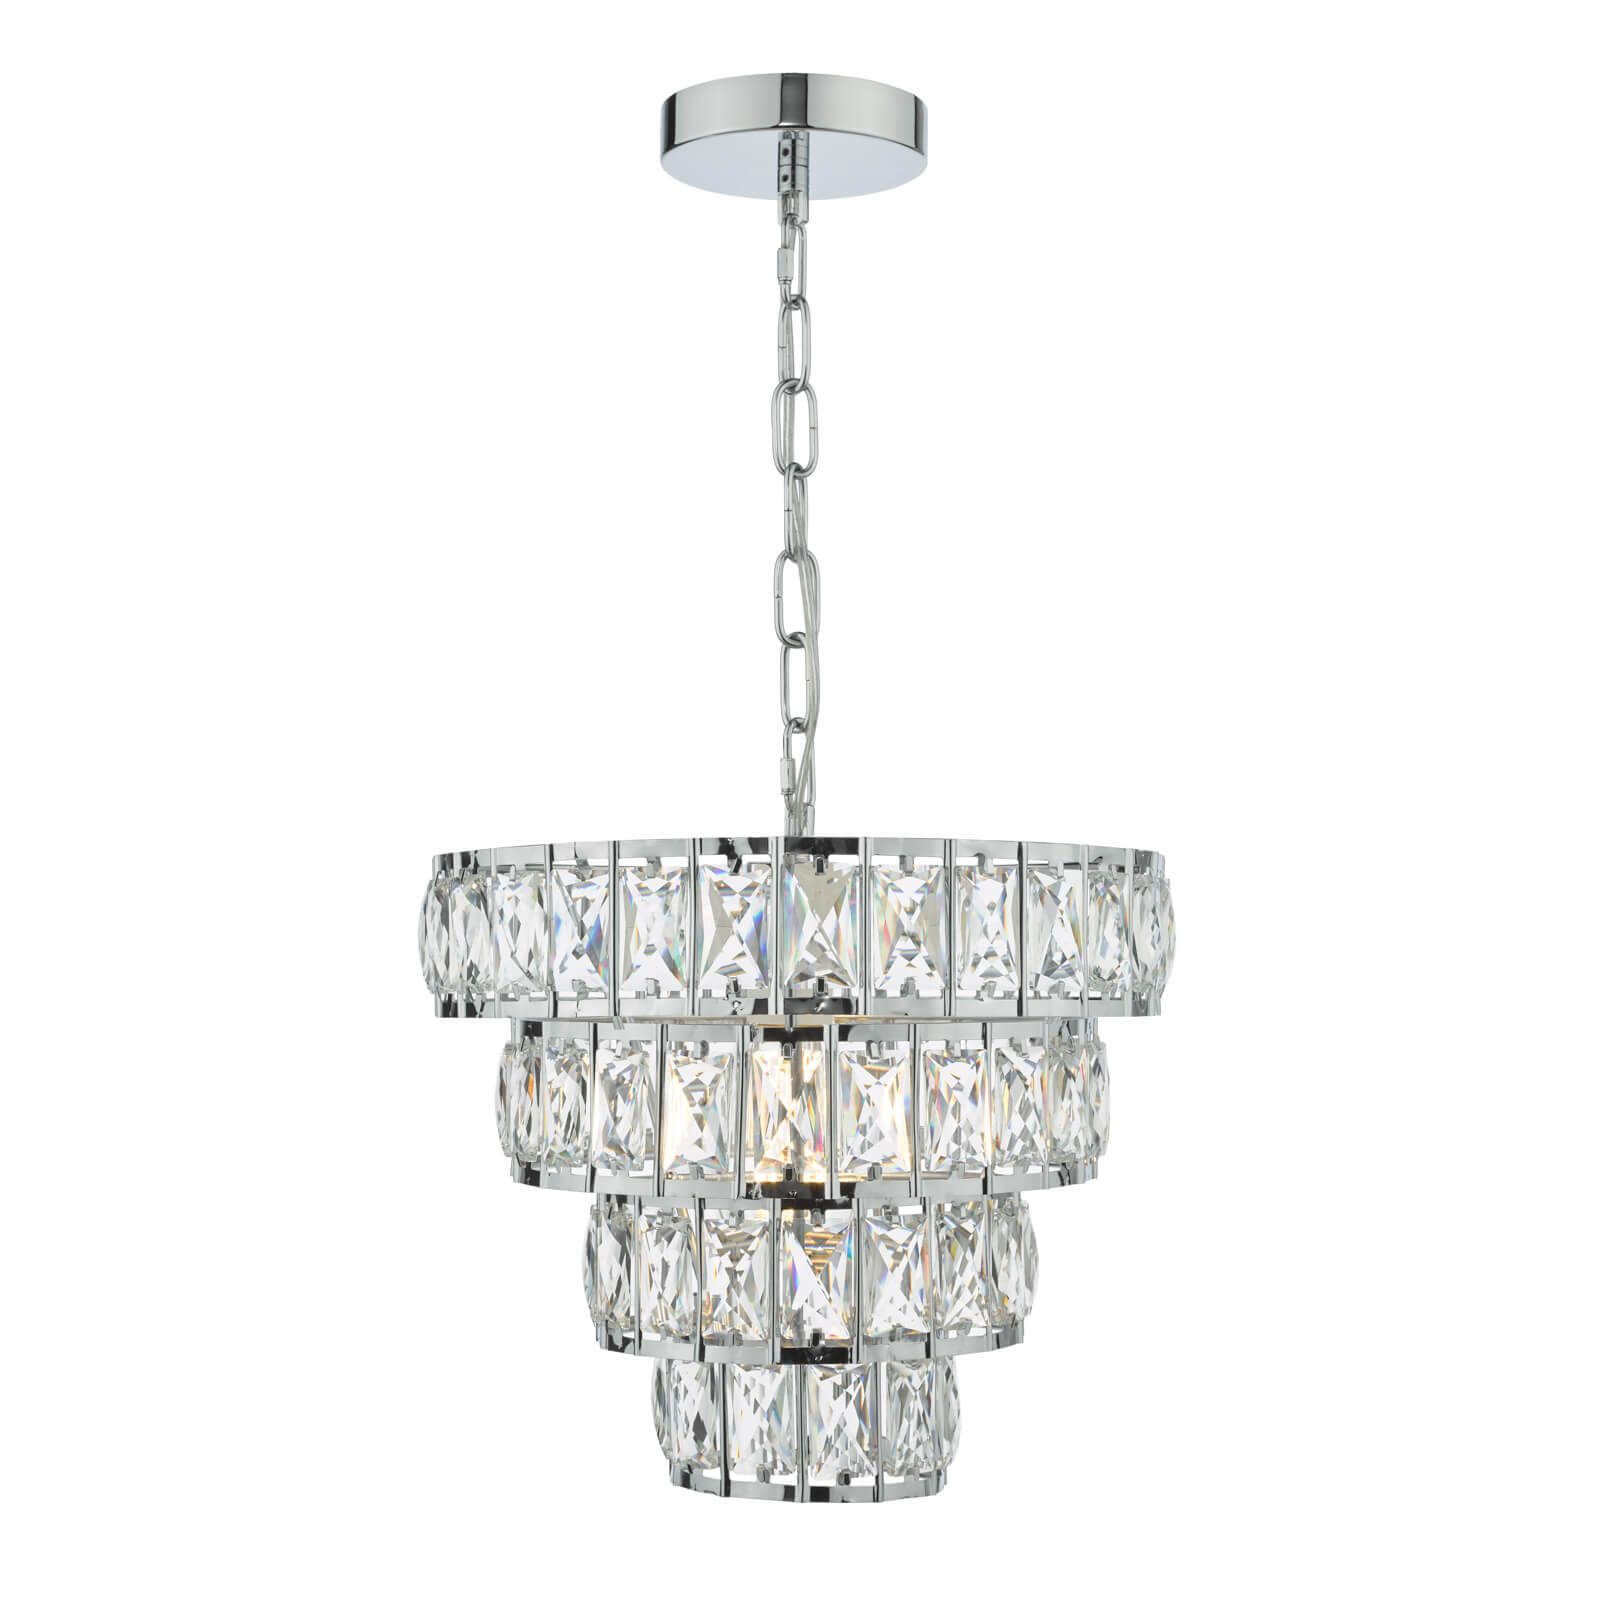 Showing image for Carly 4-tier pendant - crystal & chrome